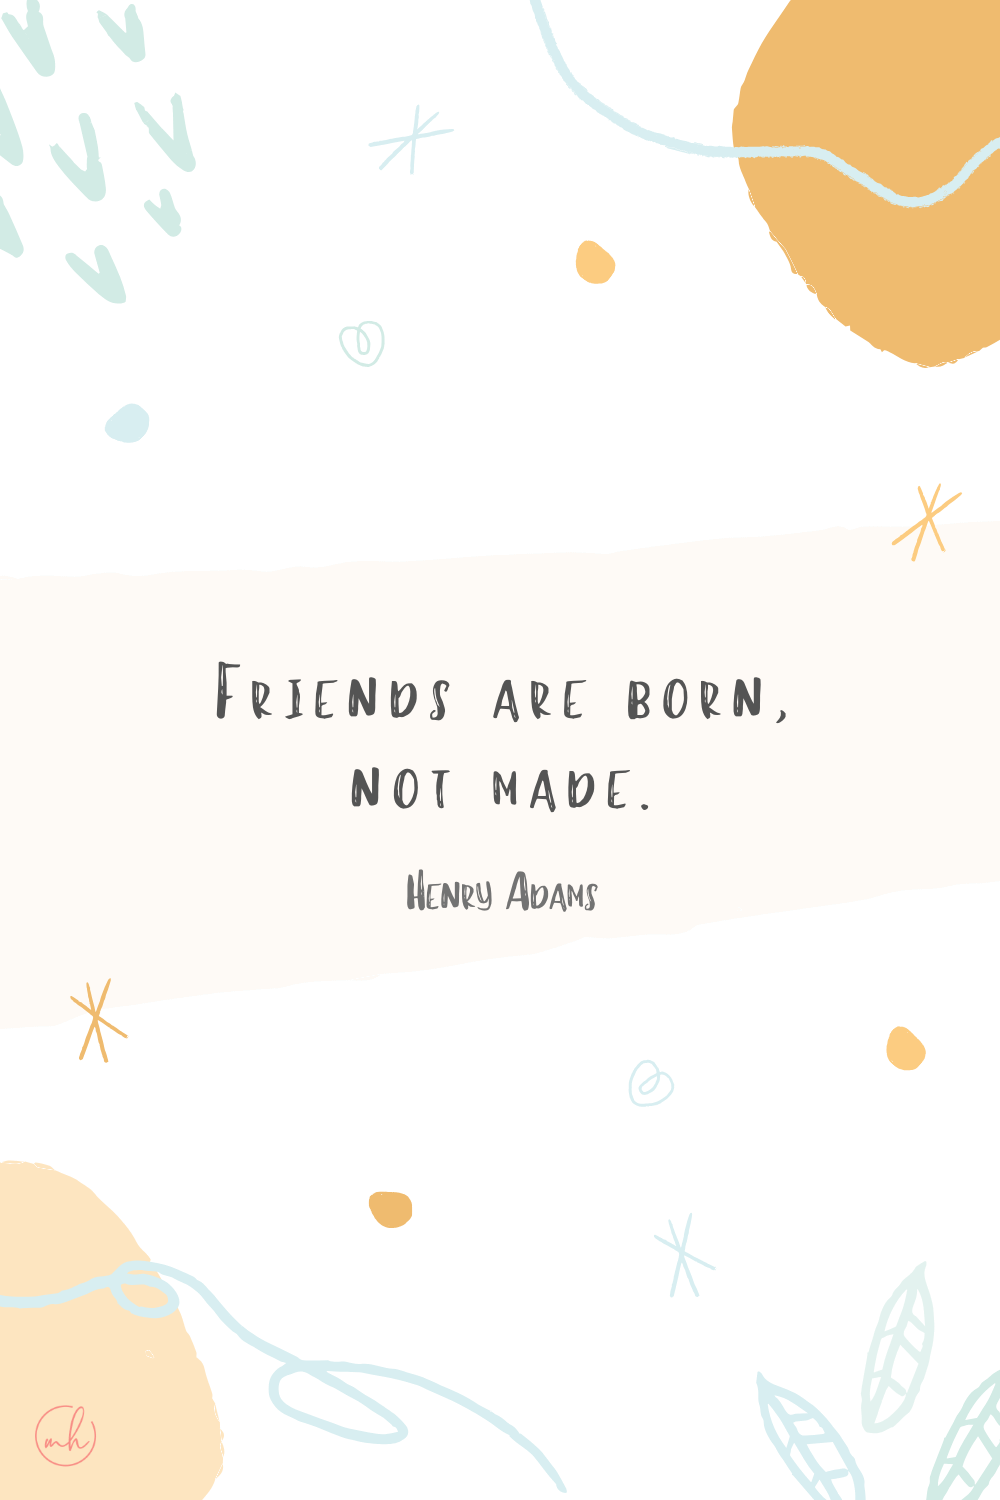 “Friends are born, not made.” - Henry Adams